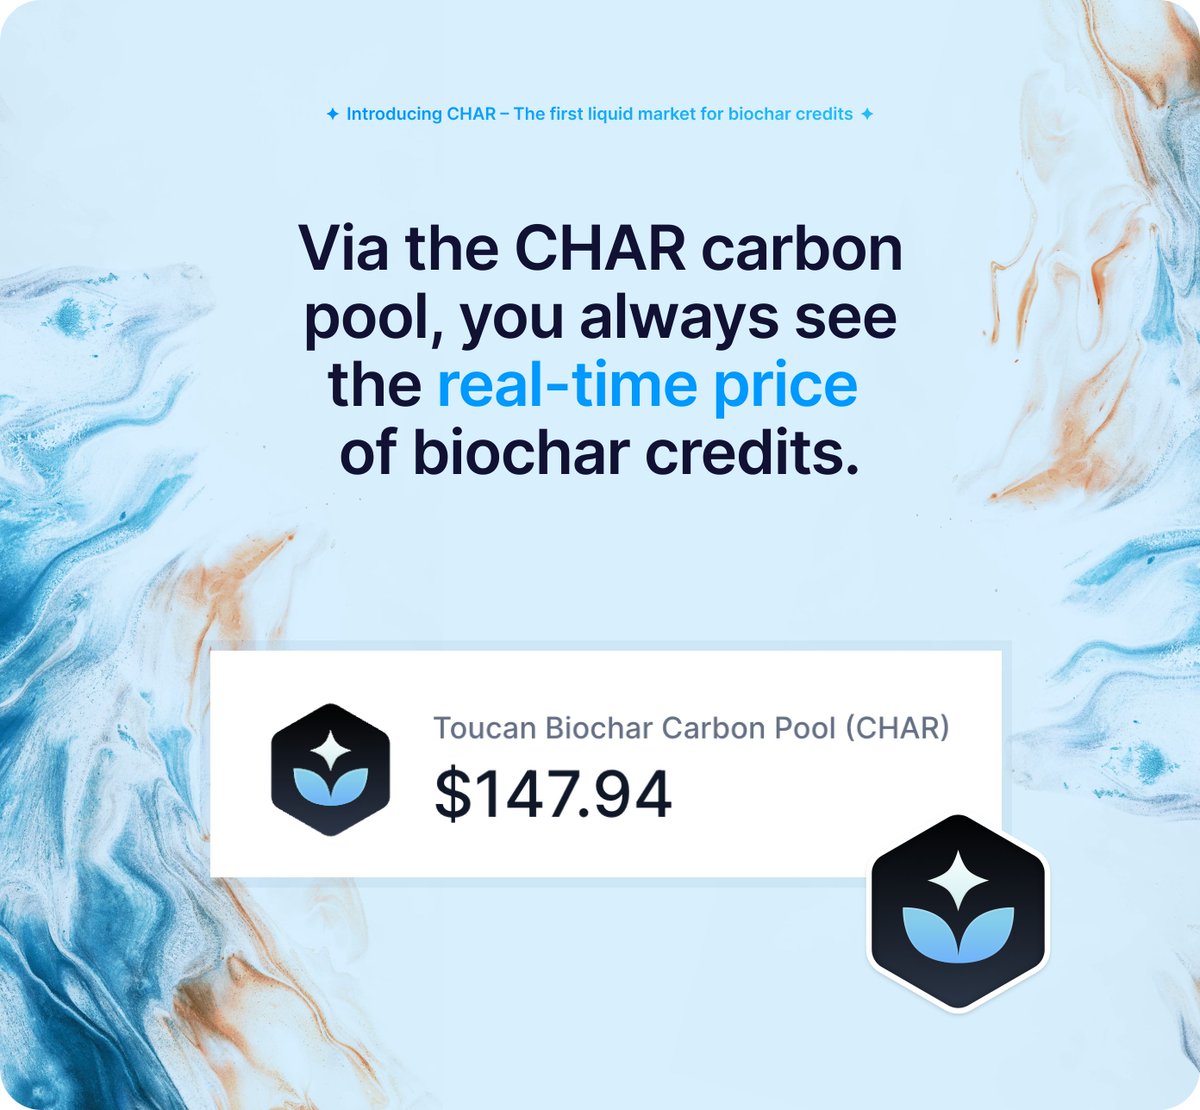 💰🔎 All biochar credits available via #CHAR are sold for a clear price, which updates dynamically based on real-time market activity. ➡️ Sellers always know how much their project can sell for ➡️ Buyers can view the current market price of biochar 👉 toucan.earth